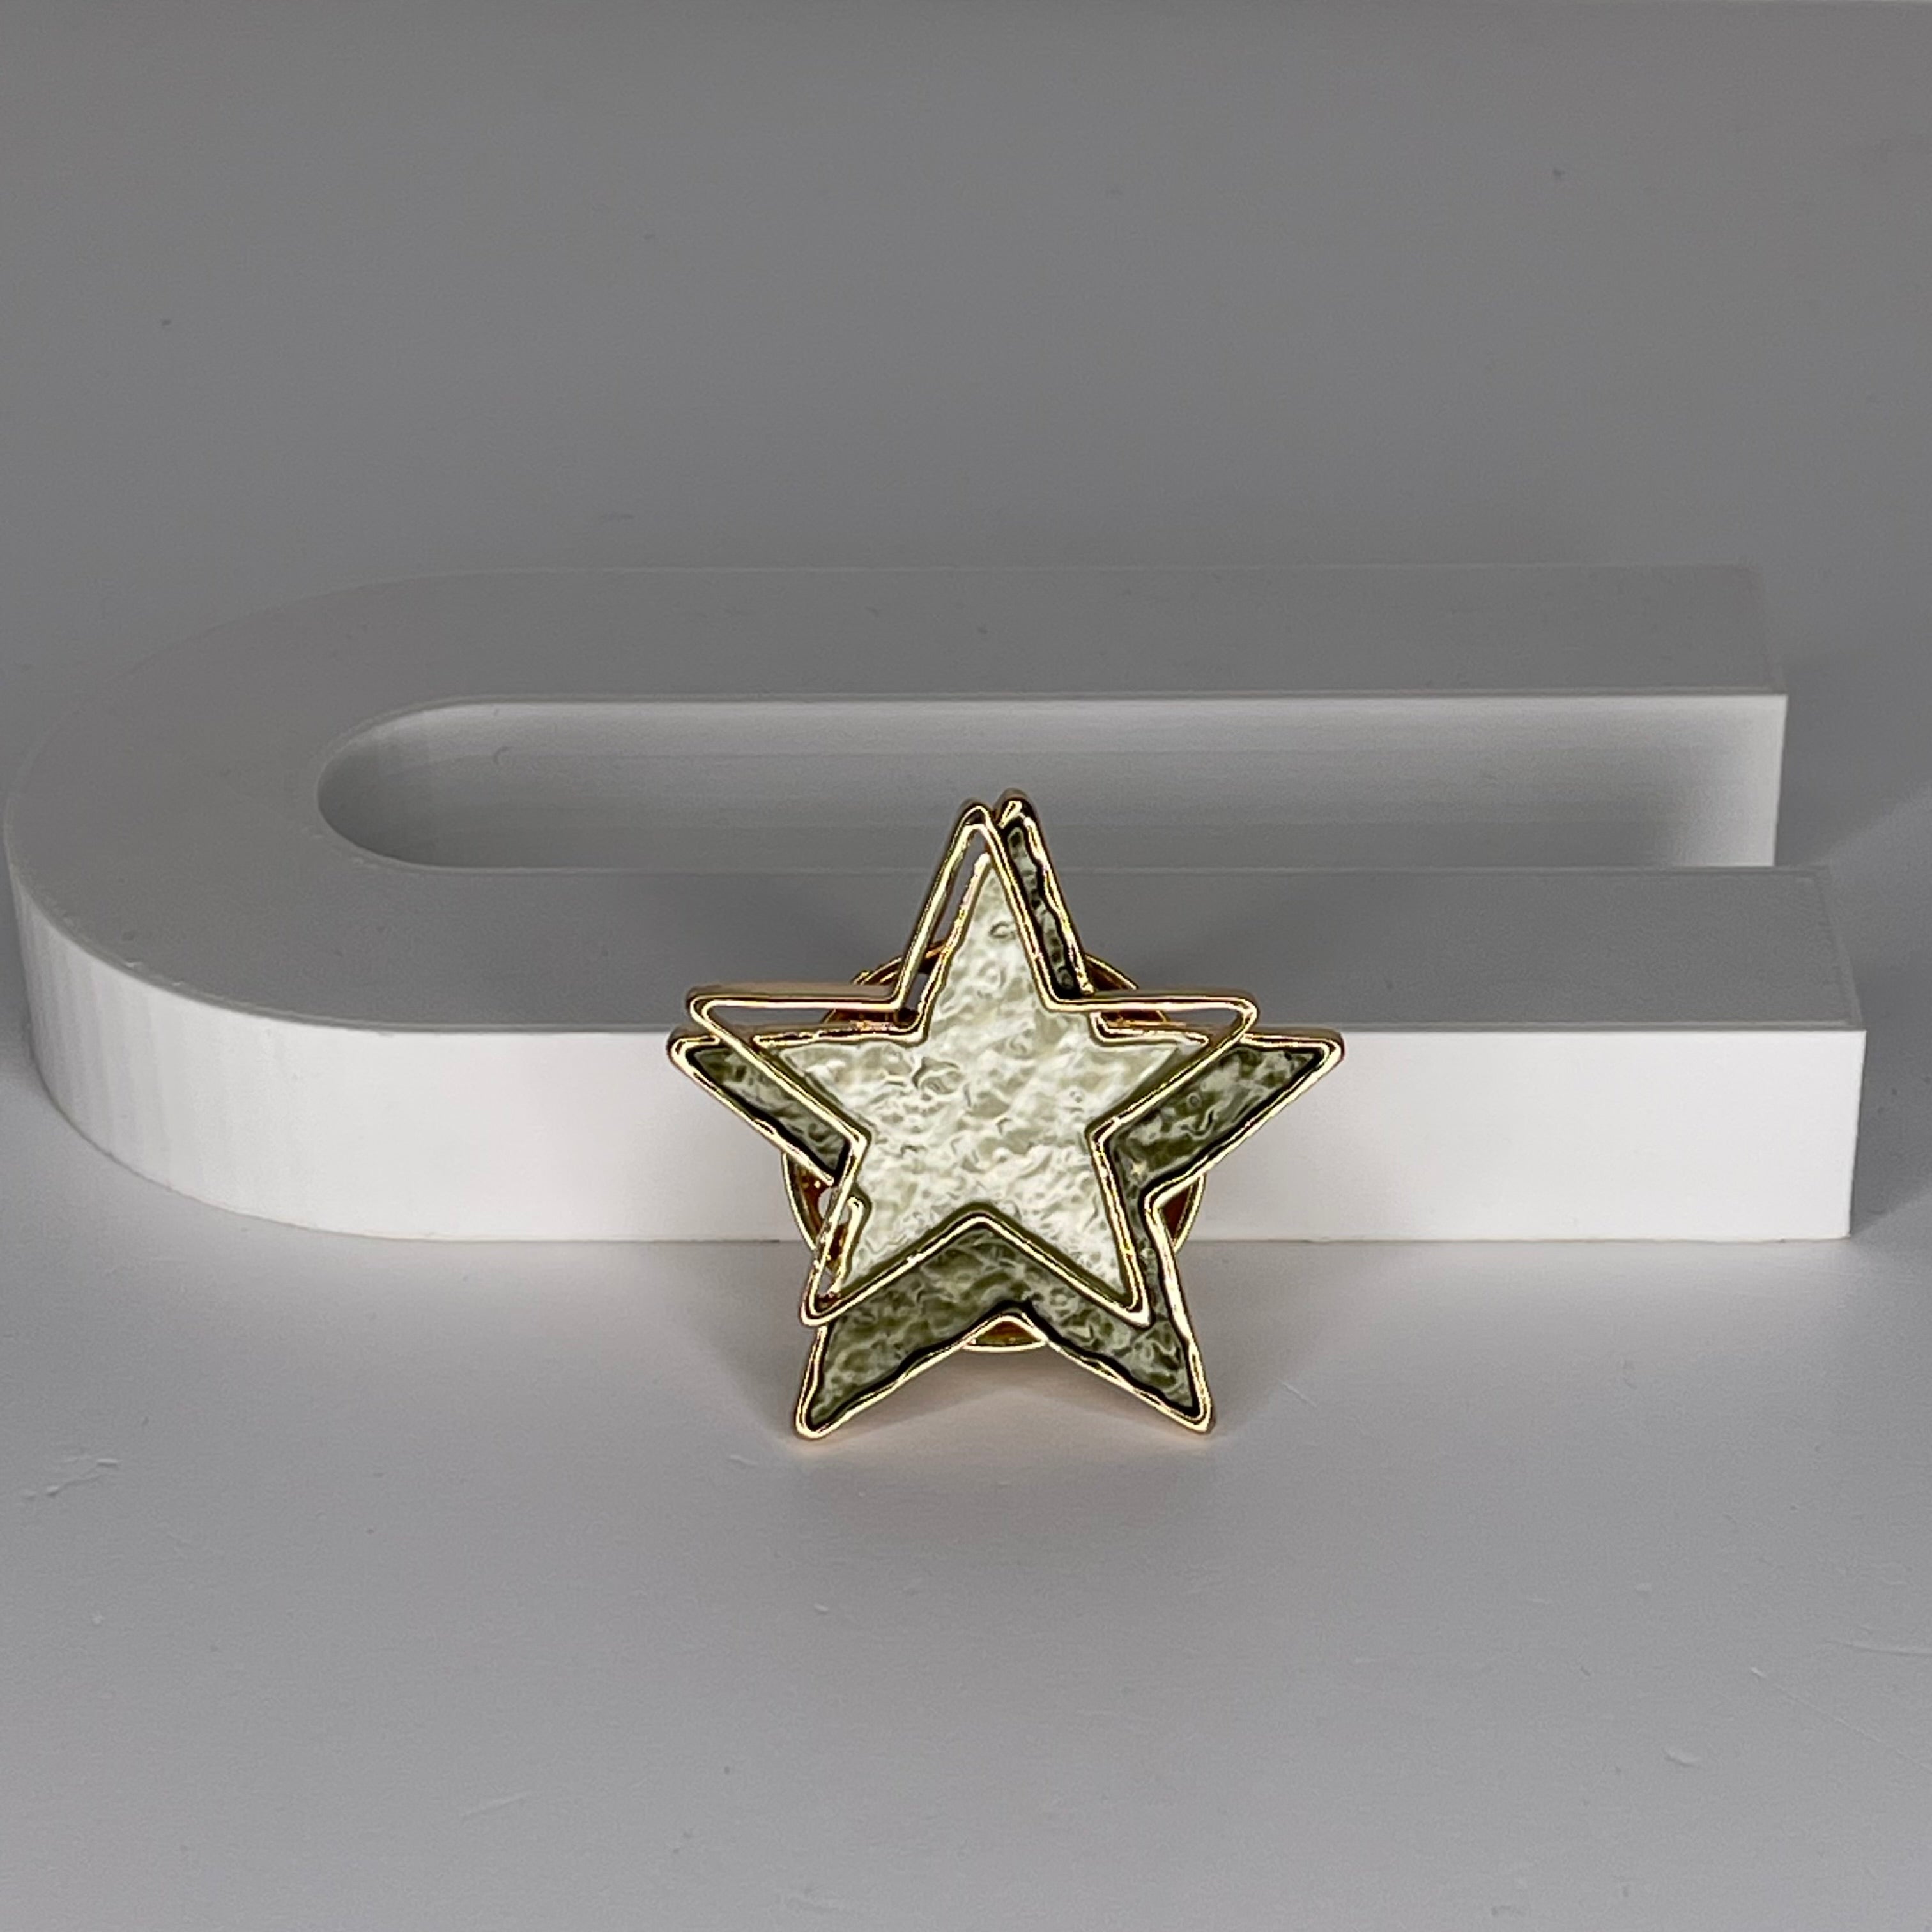 Magnetic brooch & scarf clip  - 'double star' design in shades of shiny rose gold, khaki and sage green